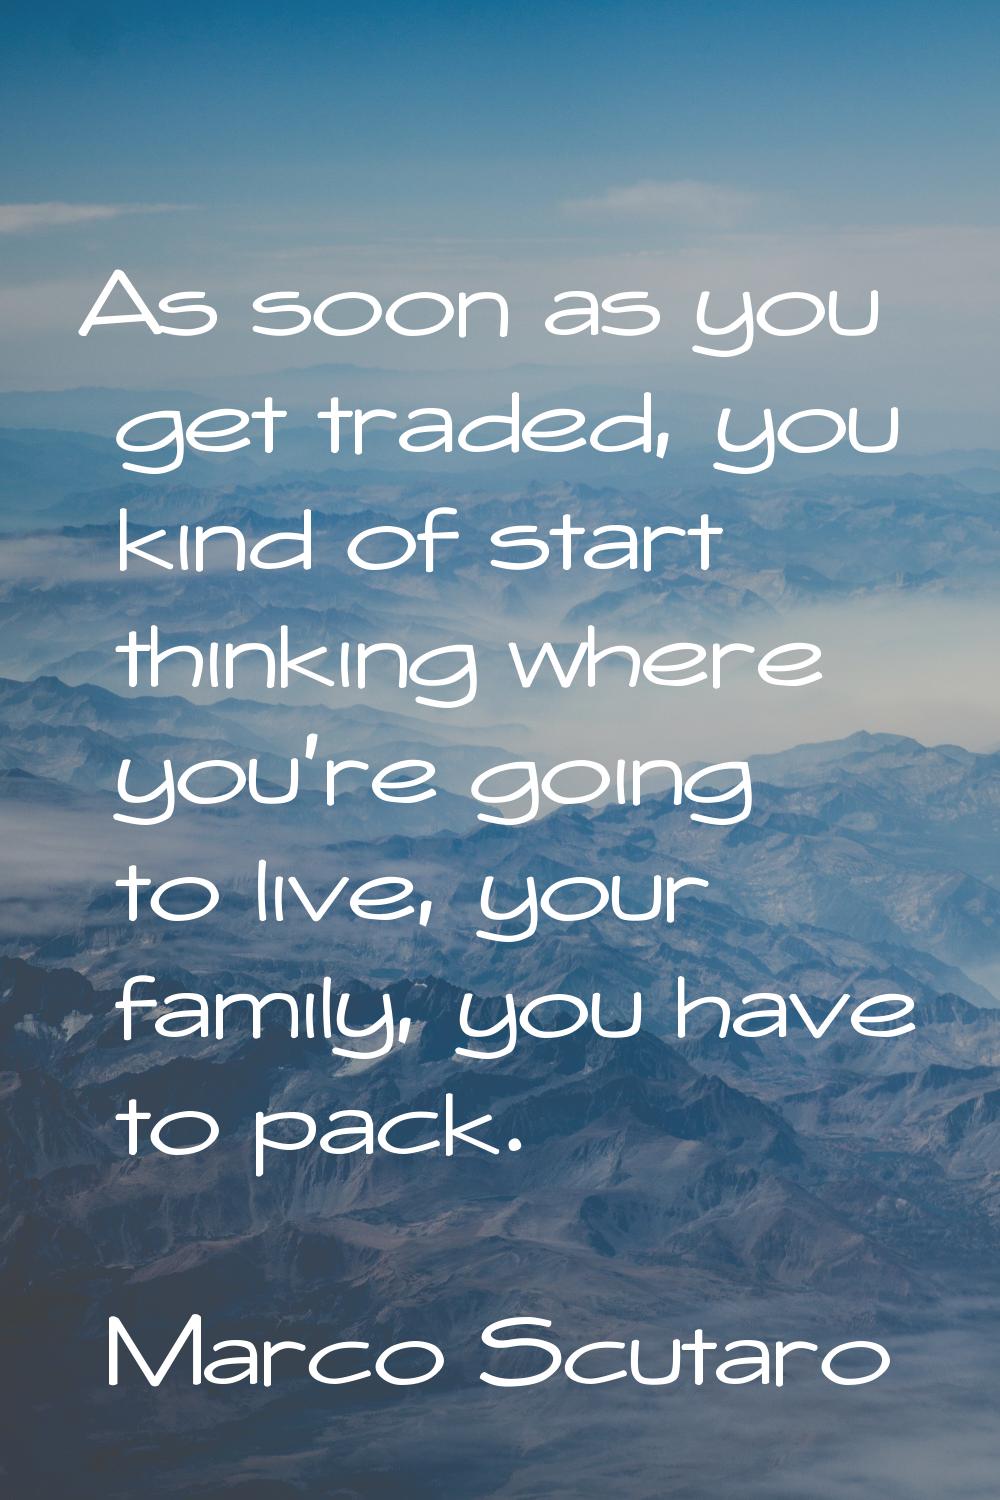 As soon as you get traded, you kind of start thinking where you're going to live, your family, you 